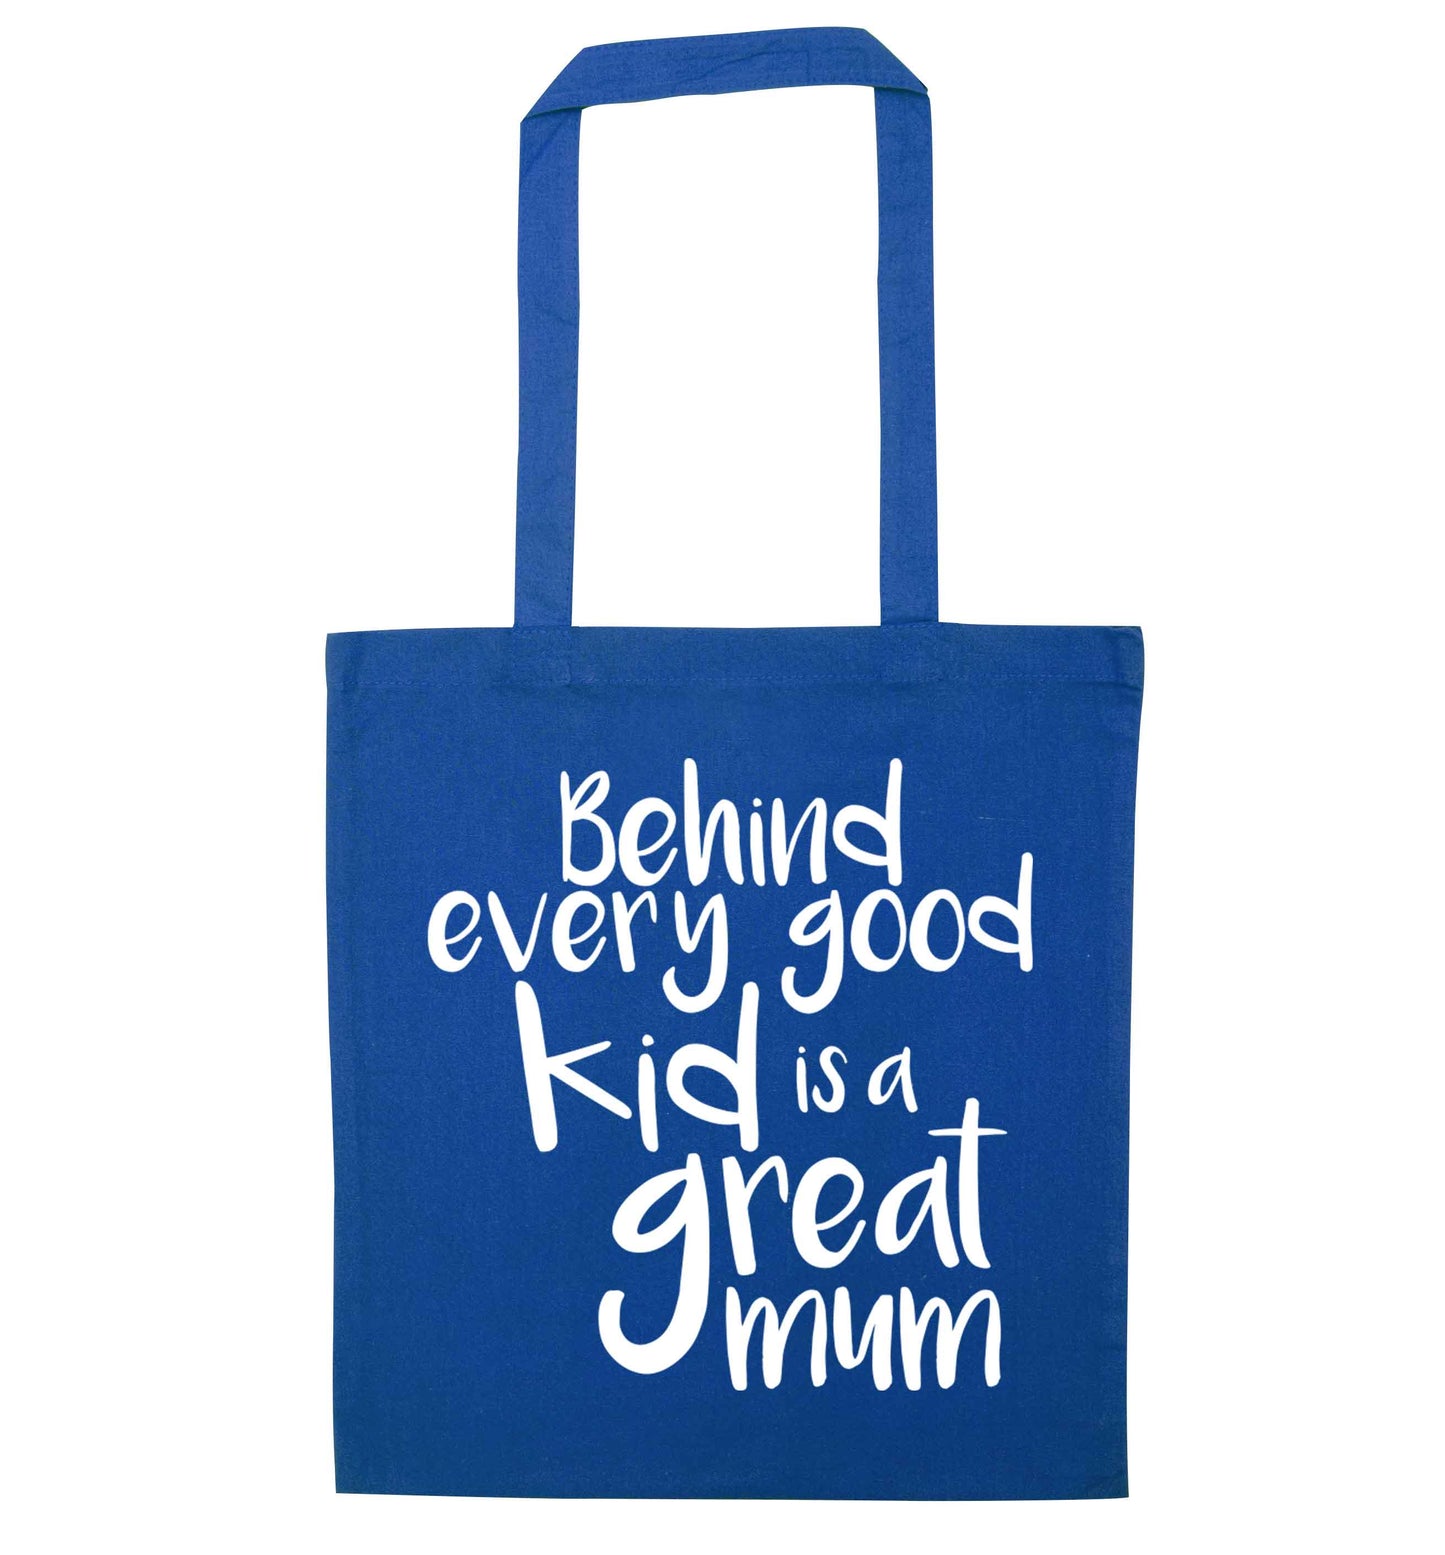 Behind every good kid is a great mum blue tote bag